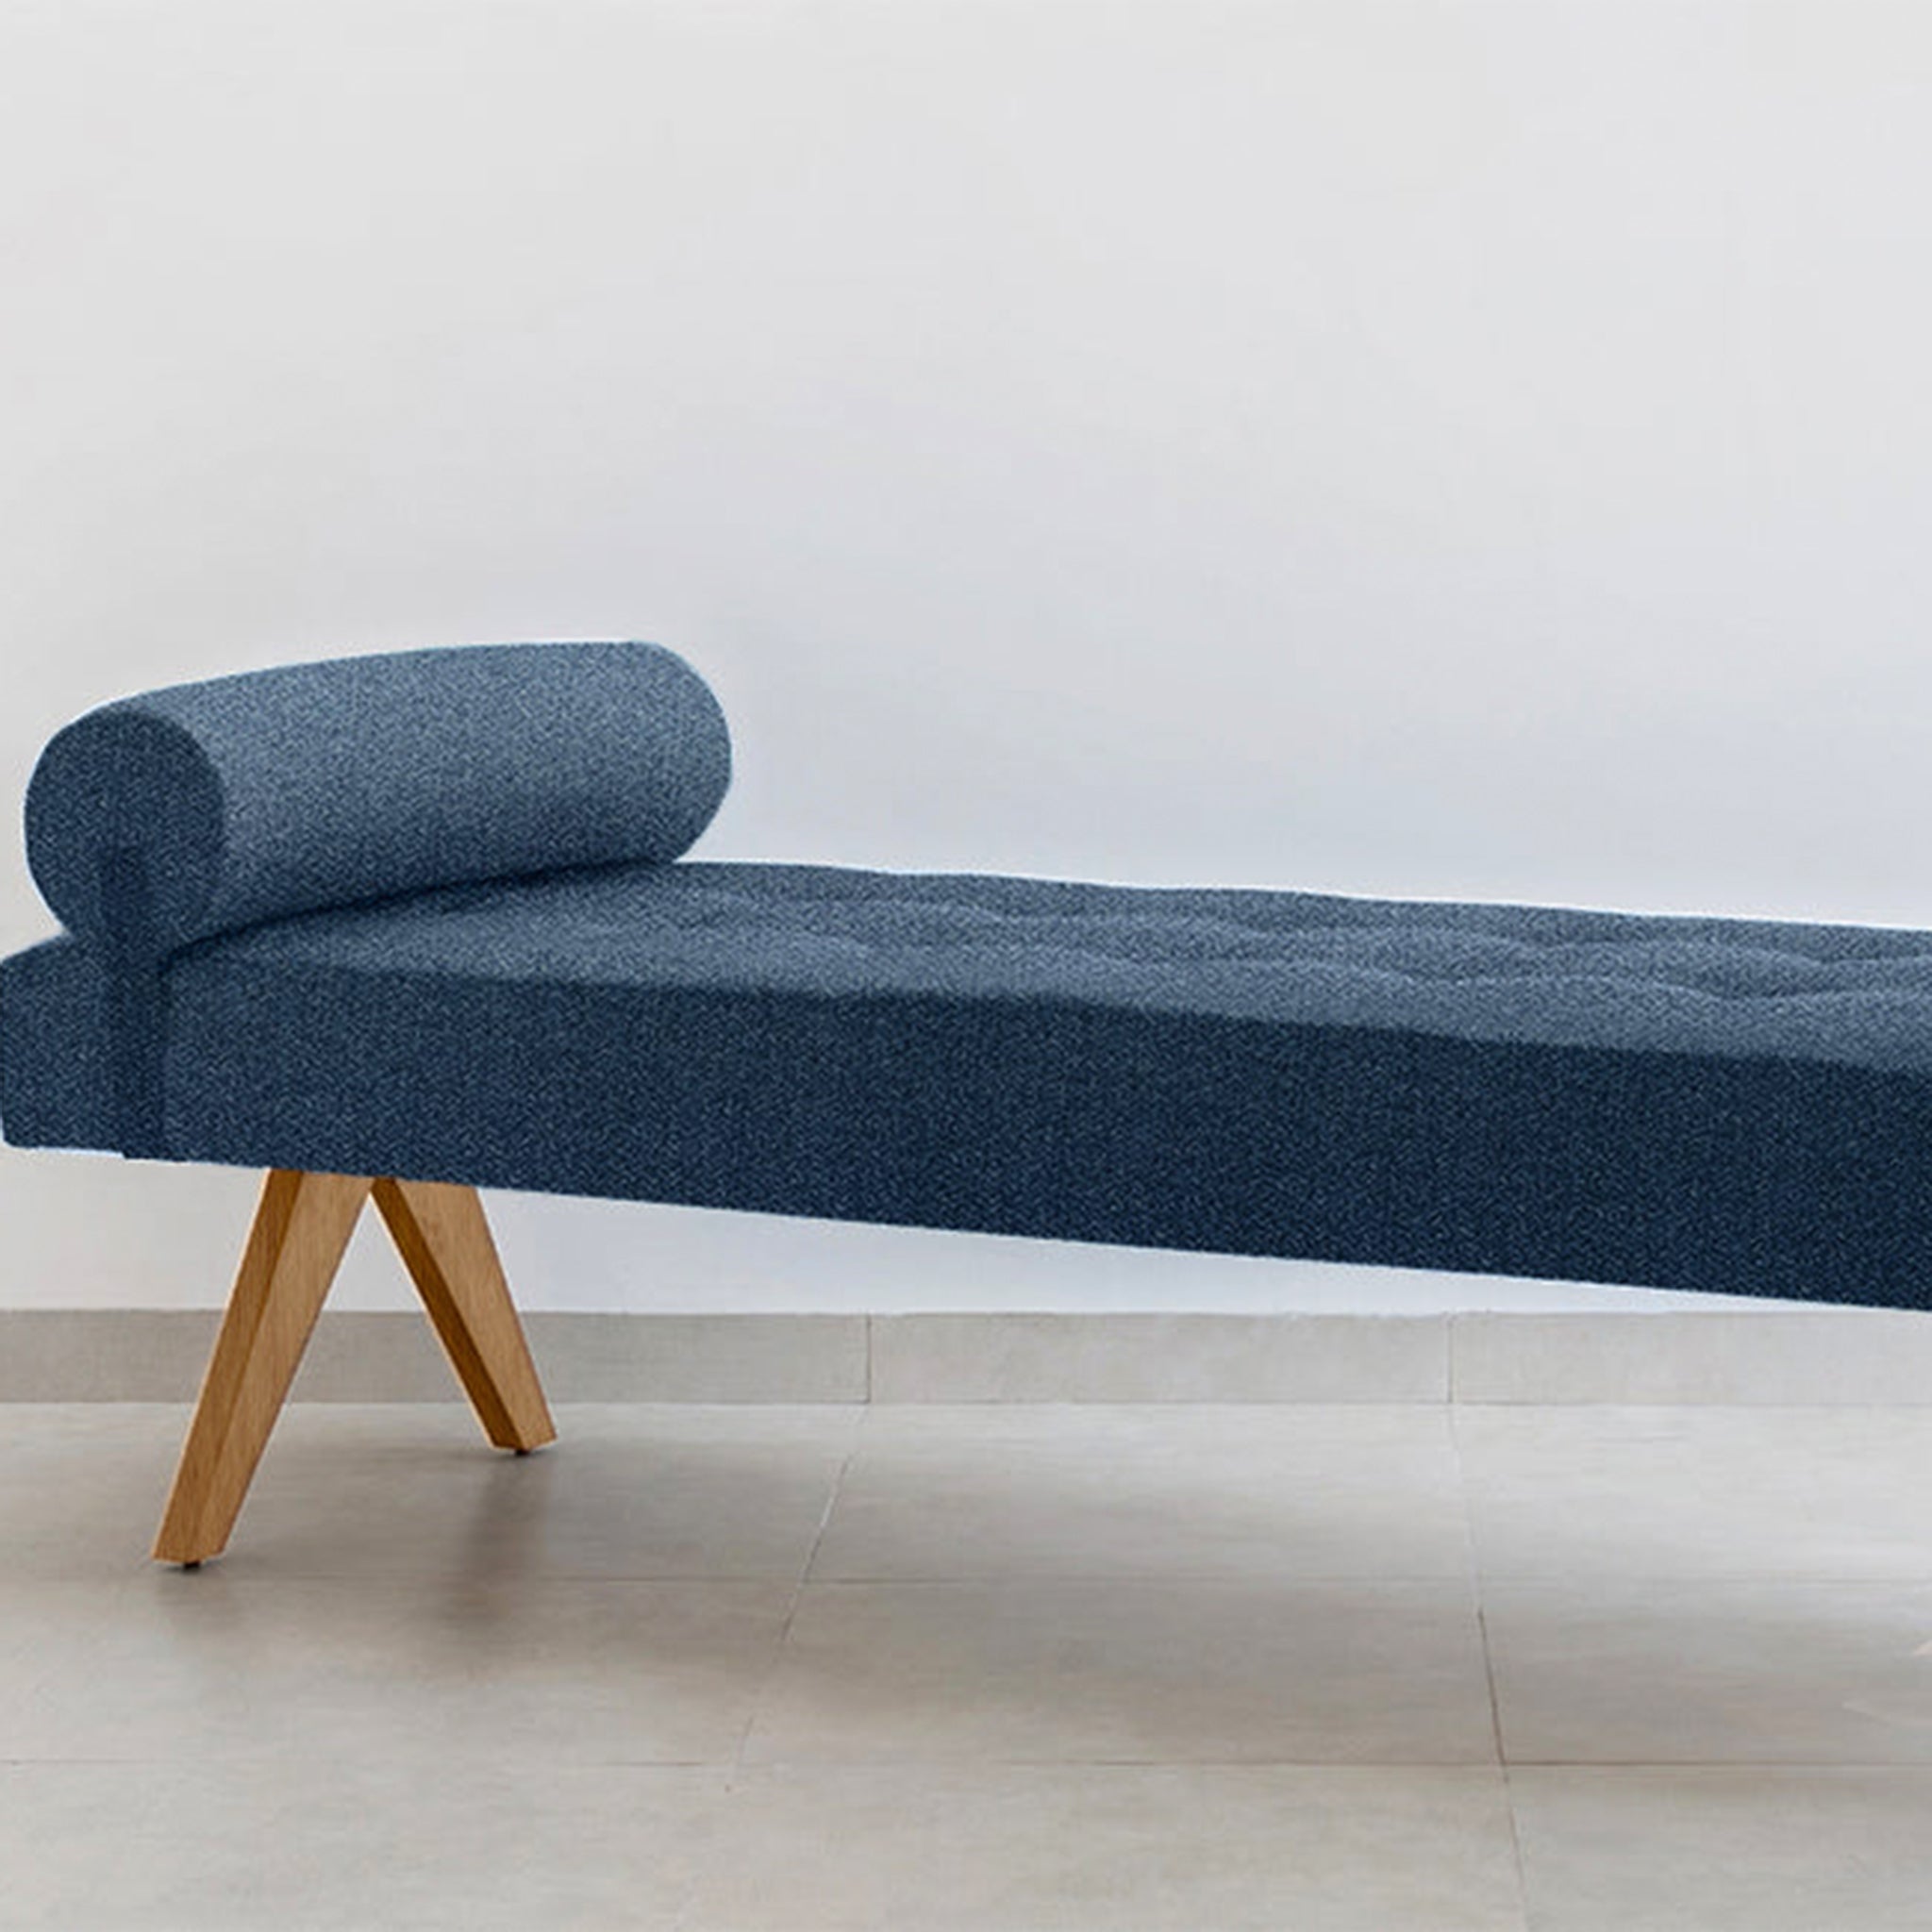 The Jack Daybed with deep blue upholstery and wooden legs